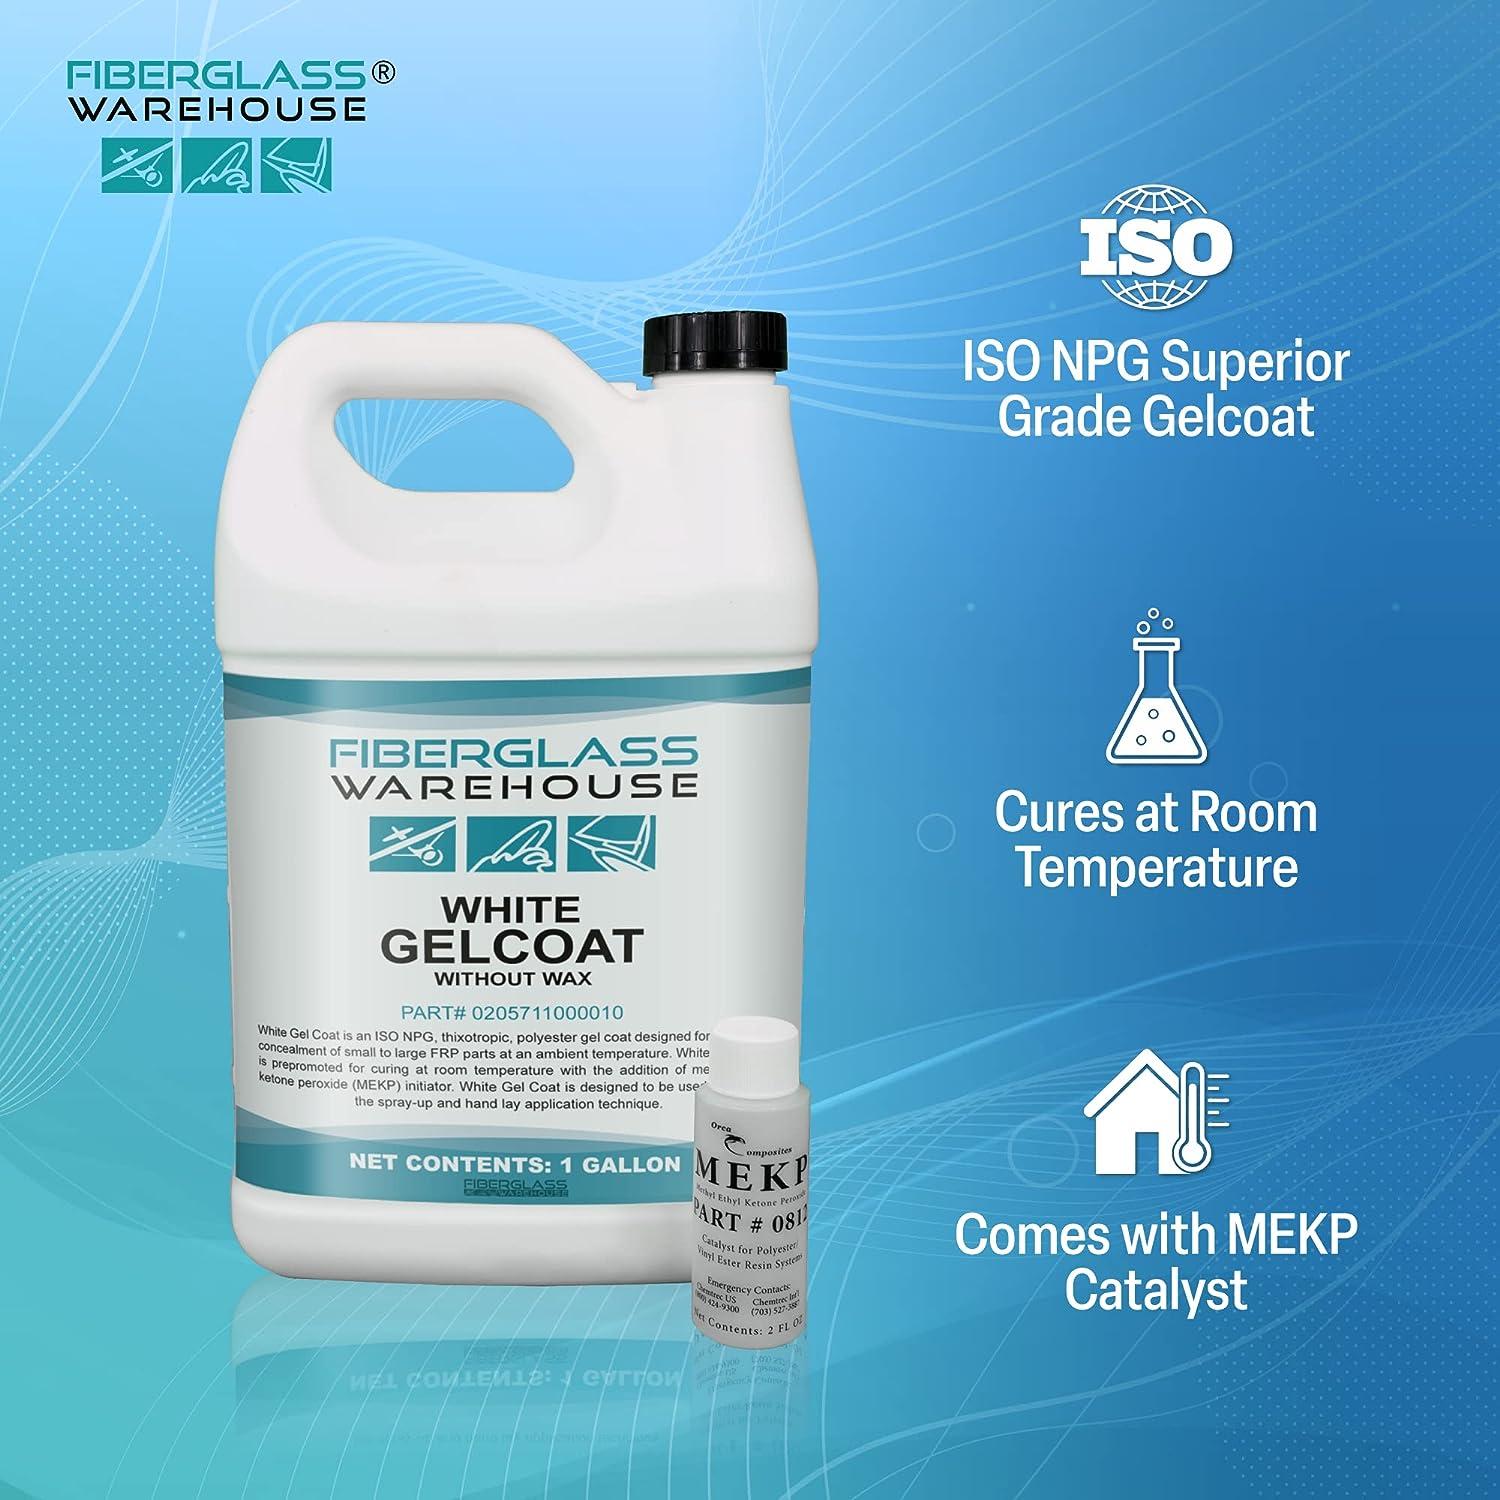 Fiberglass Warehouse Gel Coat 1 Gallon White Gelcoat (No Wax) with 2 oz  MEKP Catalyst, Easy Application Modified Polyester Resin Durable and Safe  Ideal for Repairs, Composite Coating